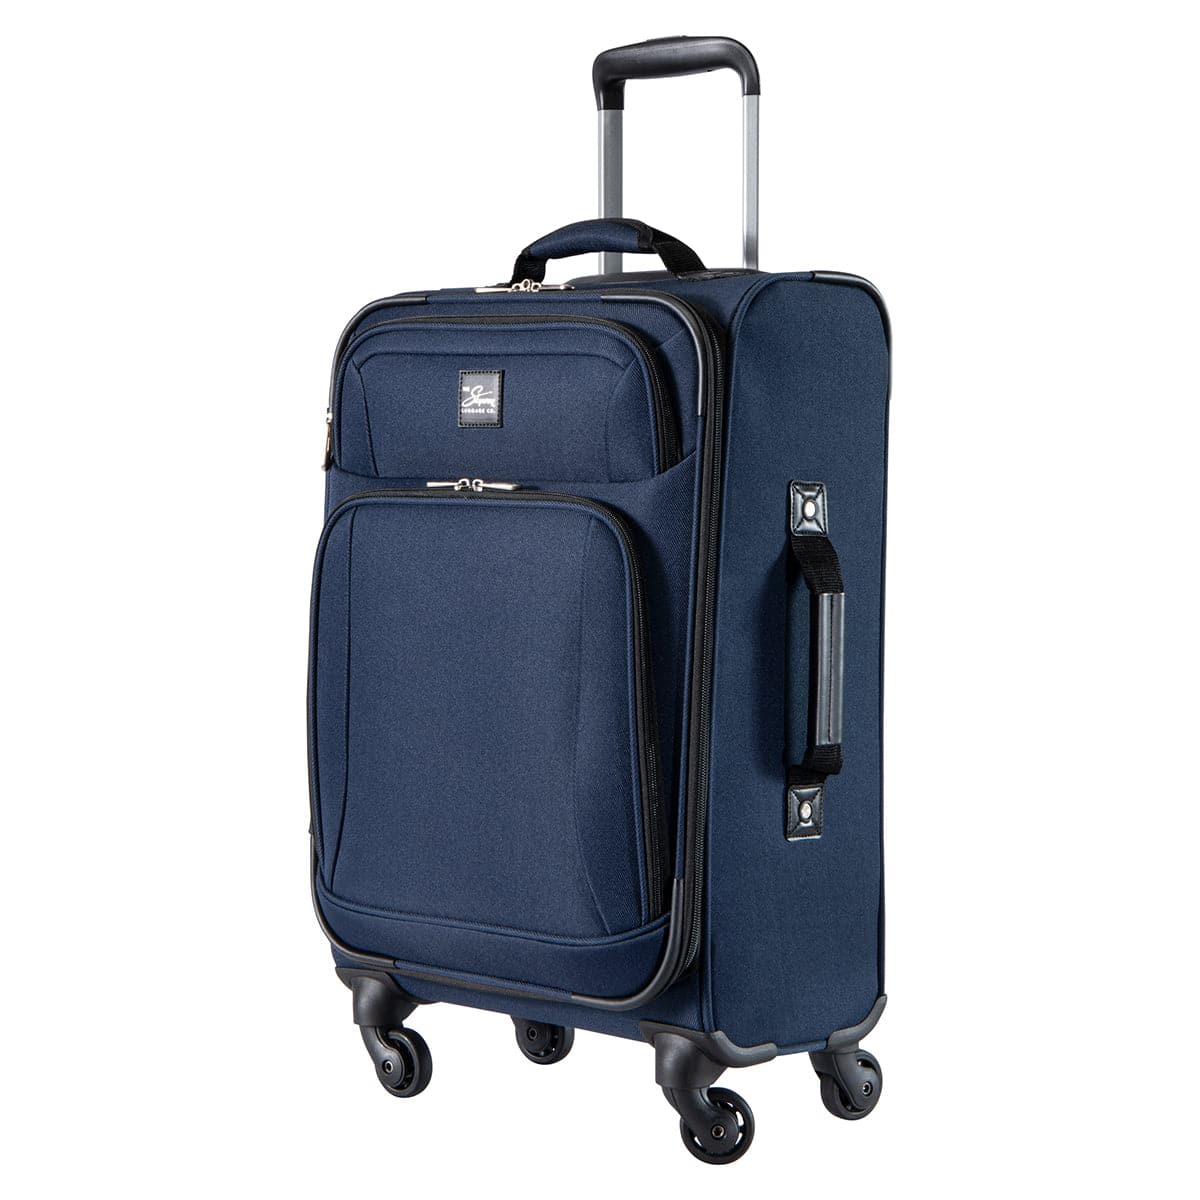 Skyway Epic SoftSide Spinner Carry-On Luggage